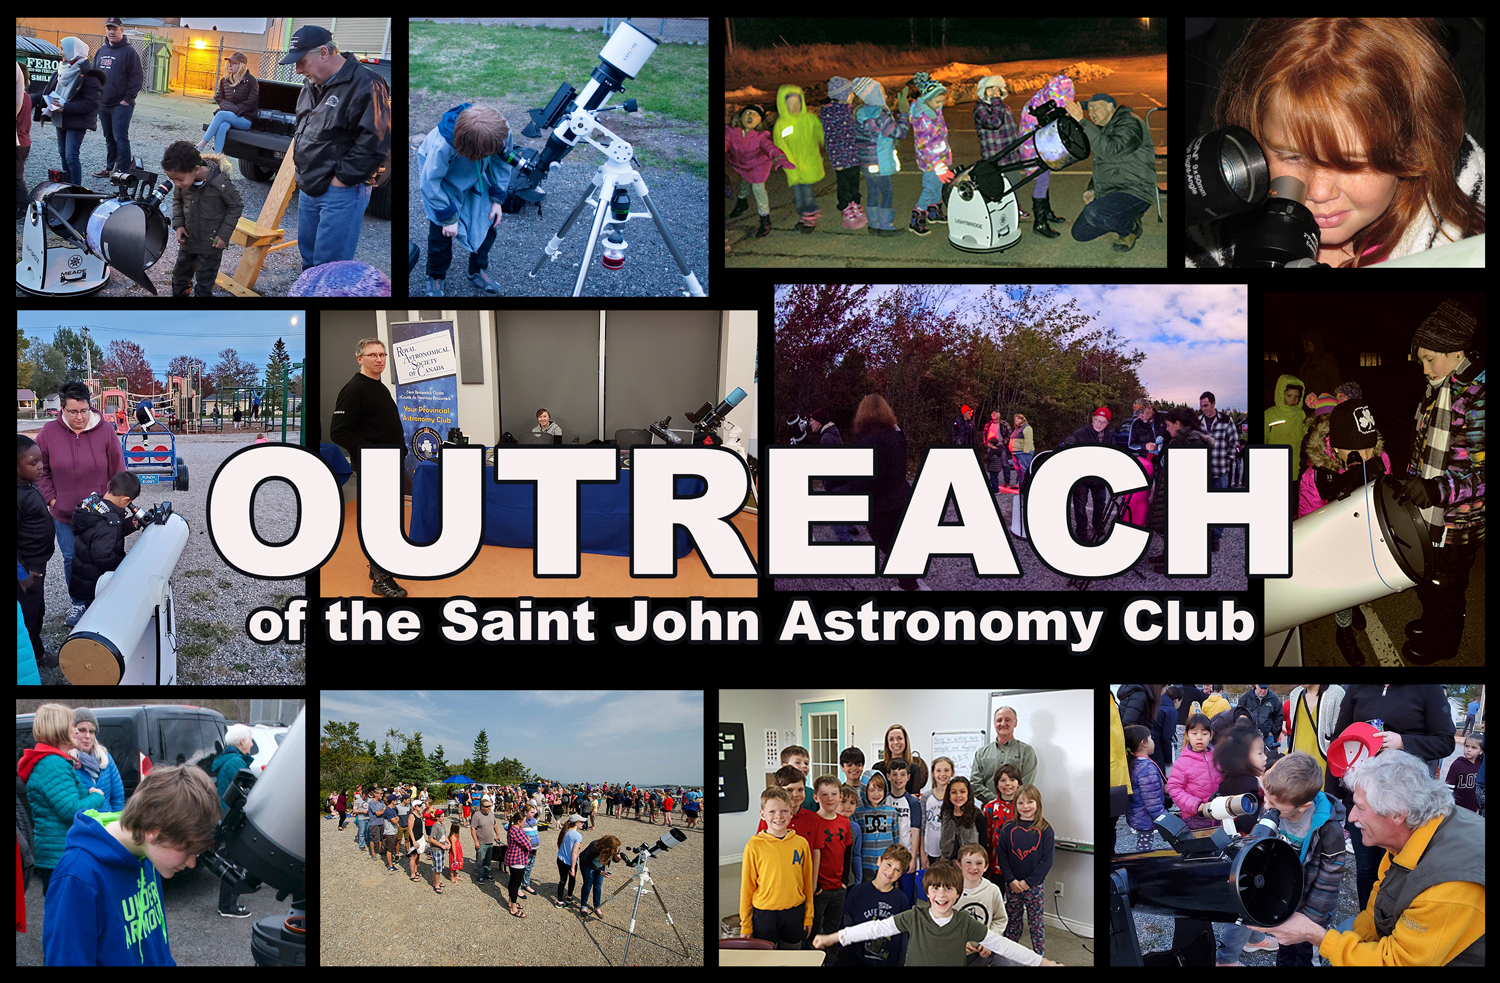 Link to the Outreach page of the Saint John Astronomy Club.